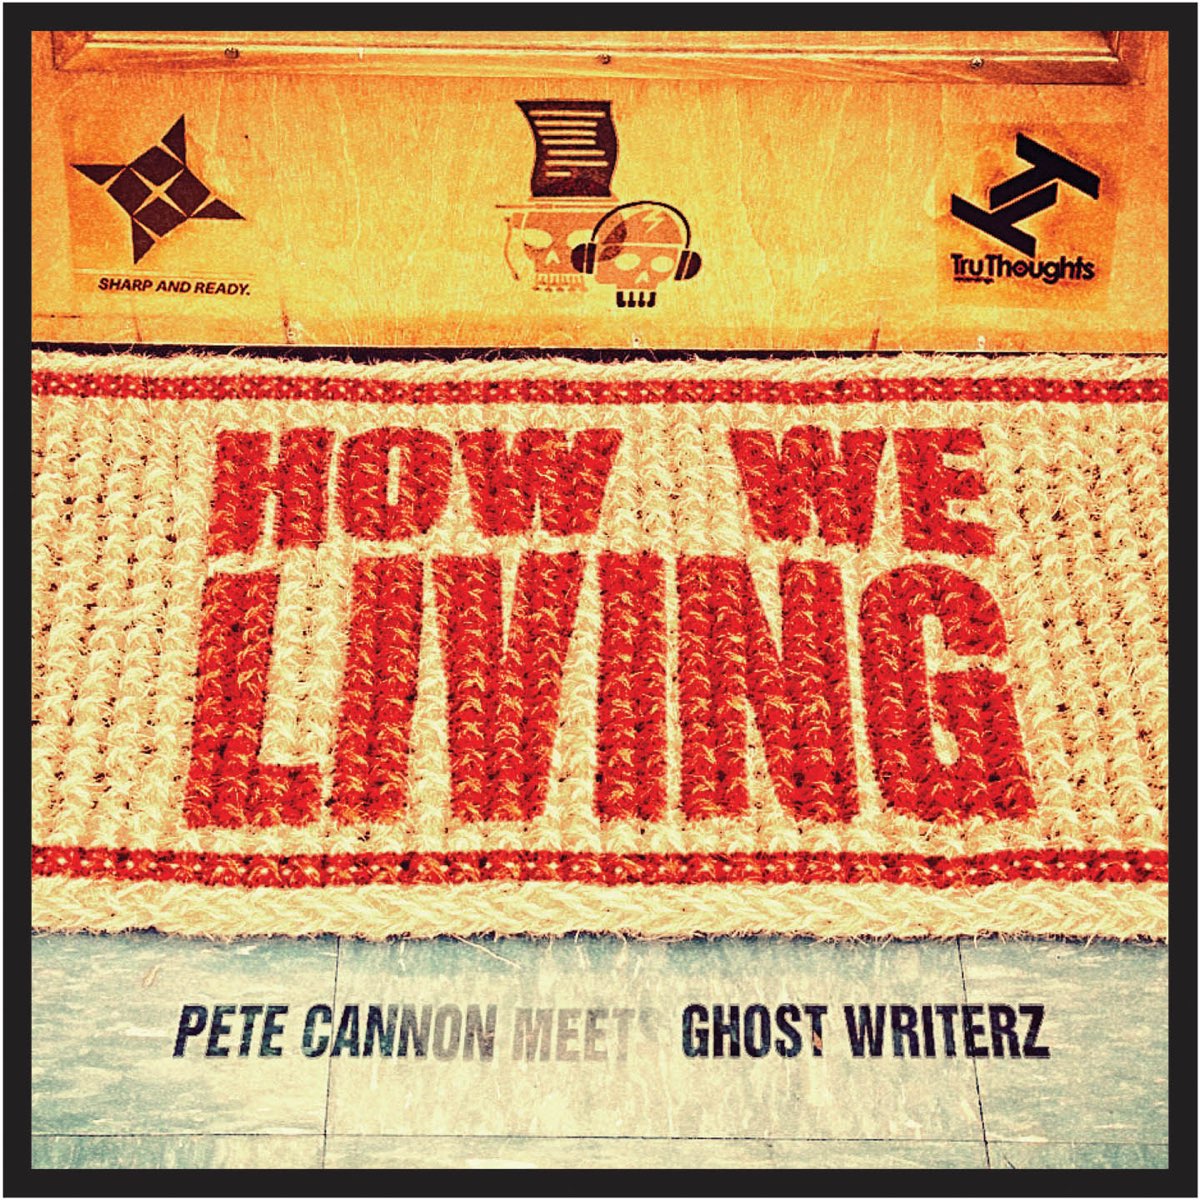 We living like that. Pete Cannon. Meet a Ghost.